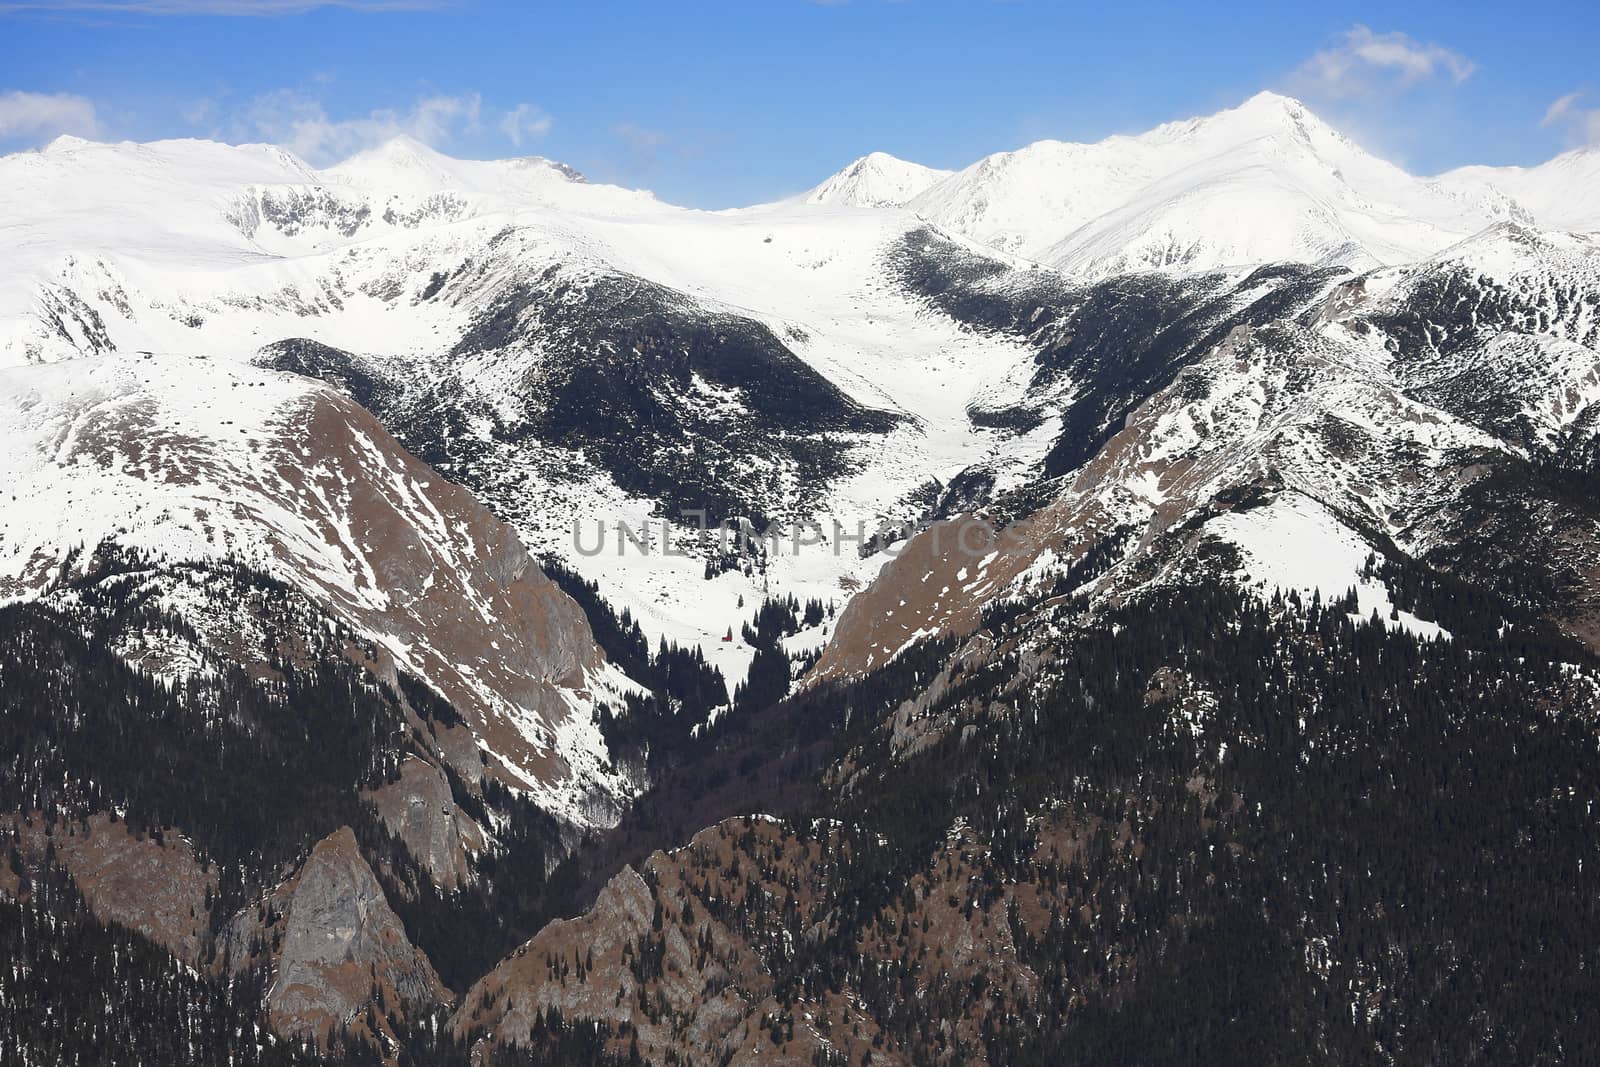 A beautiful view of high altitude peaks covered in snow and a nice valley in the middle starting between two rocky ridges with no snow left and continuing to the top of the mountains